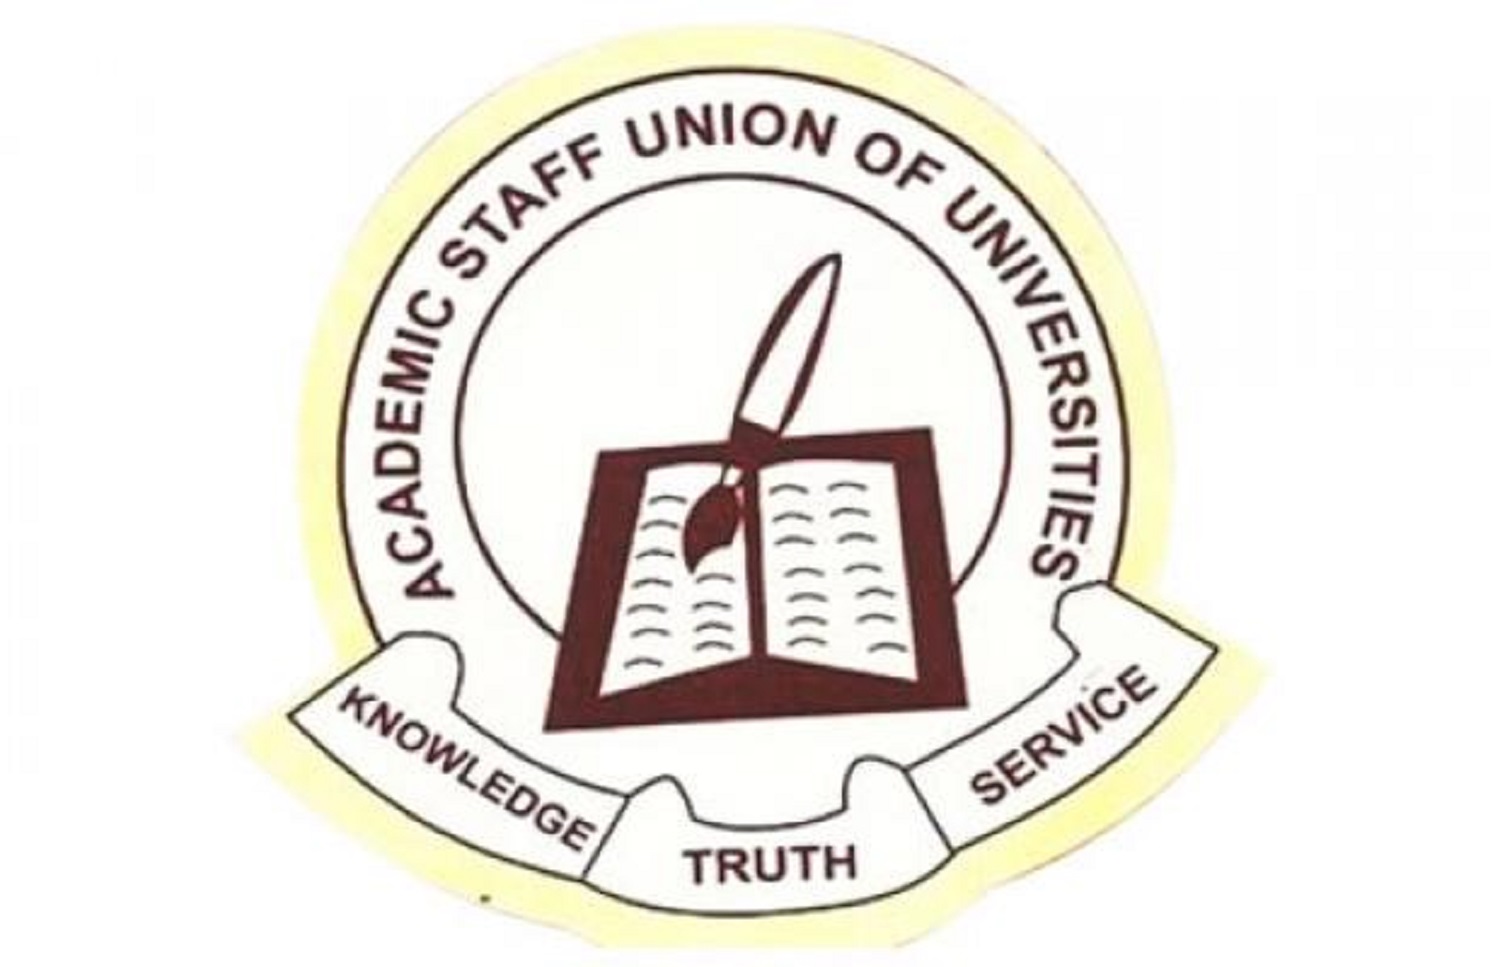 IPPIS: Our UTAS ready for integrity tests, ASUU tells FG